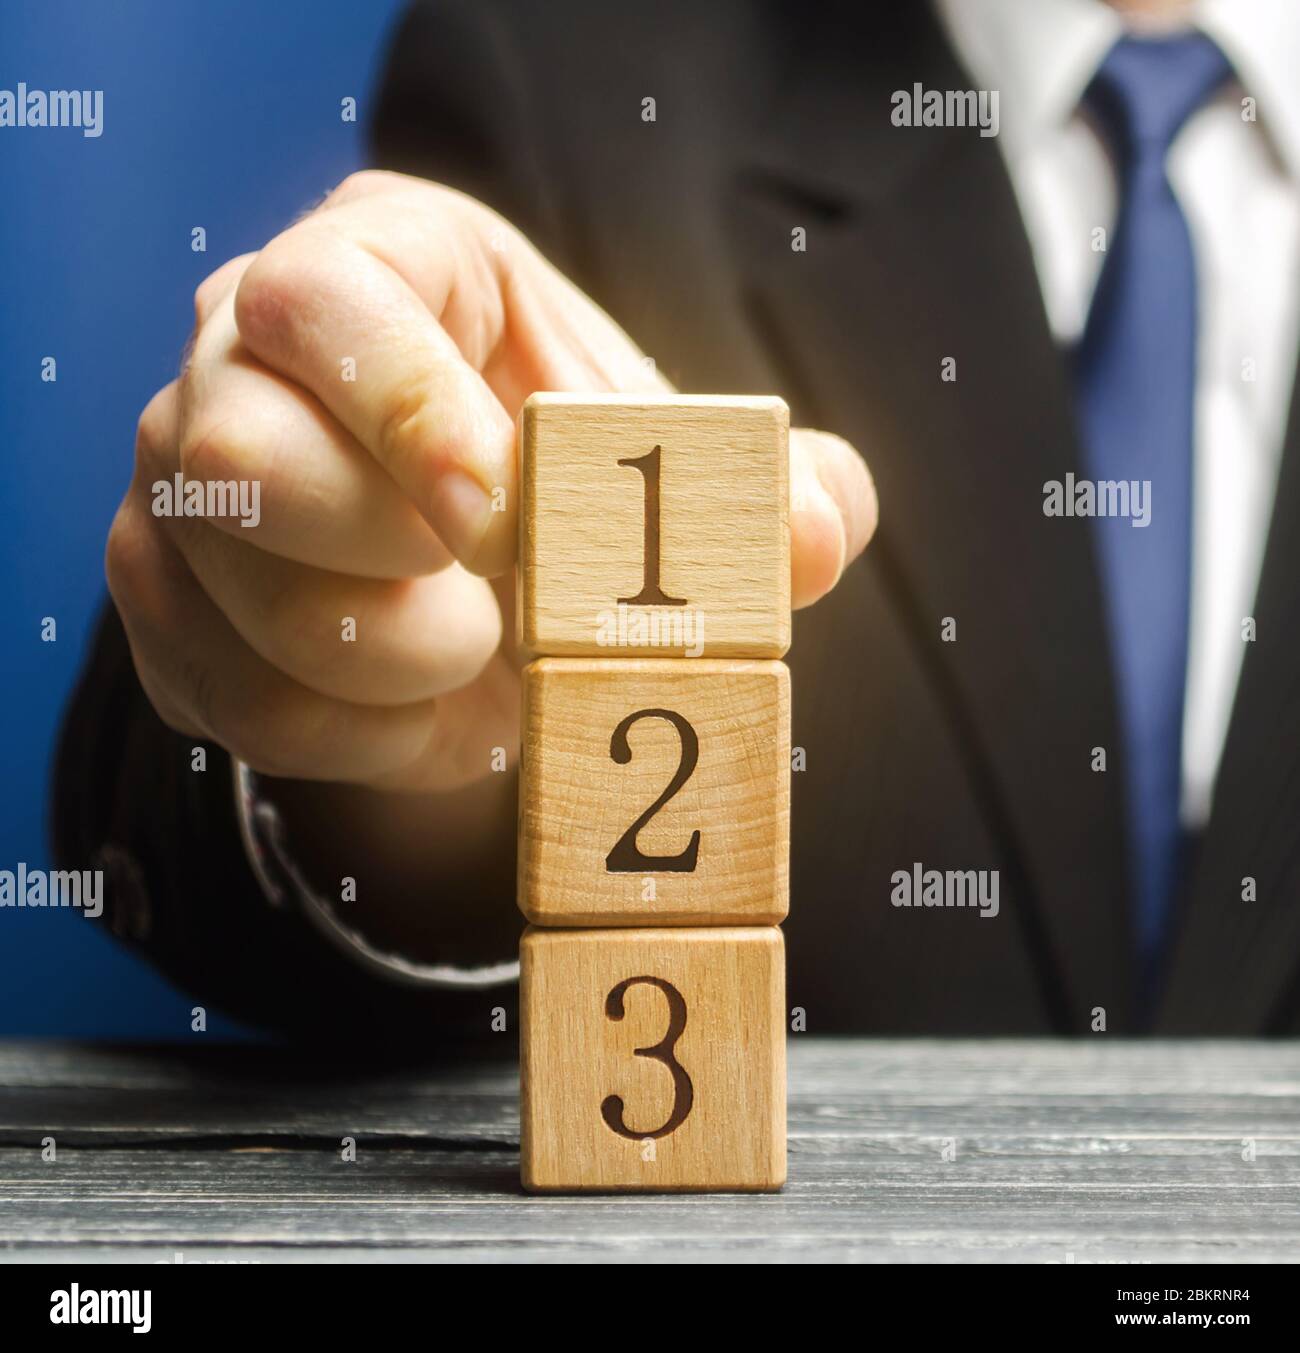 Businessman puts wooden blocks with the number 1 2 3. Task list. Alternate items and conditions for implementation. Contract road map. Organization an Stock Photo